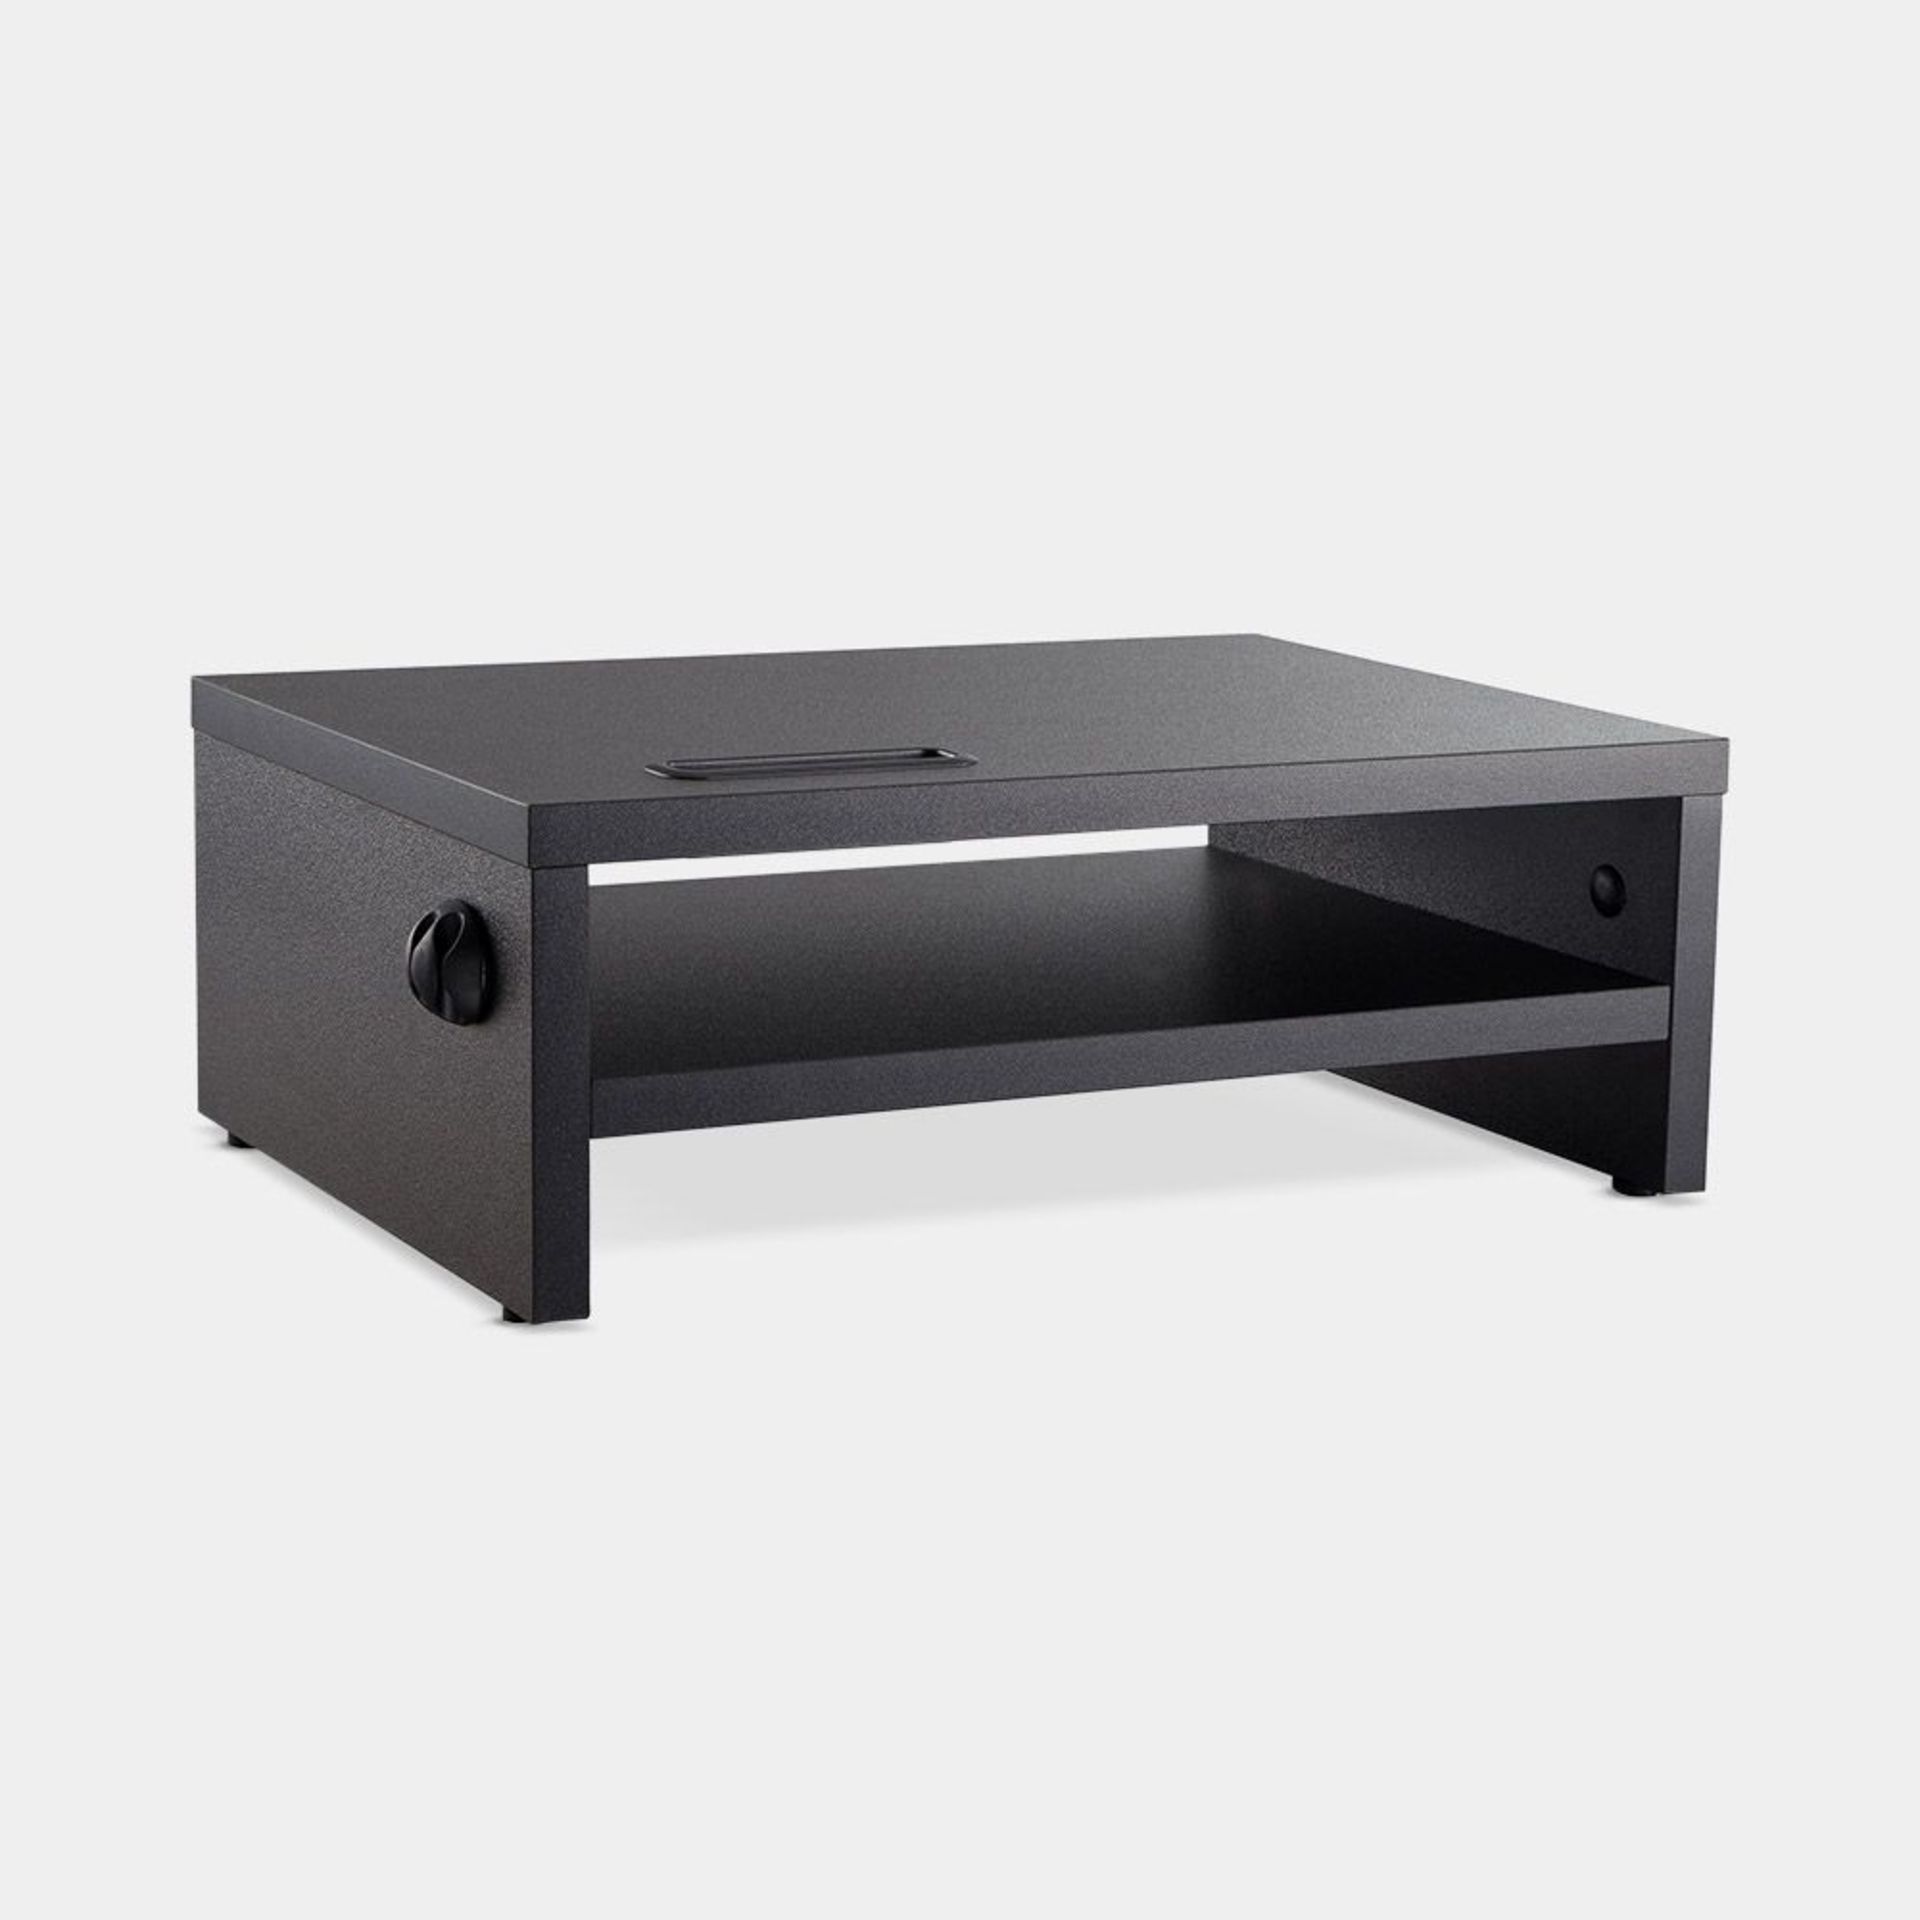 2 Tier Wood Monitor Stand. In sleek black wood, the stand has plenty of space and storage to help